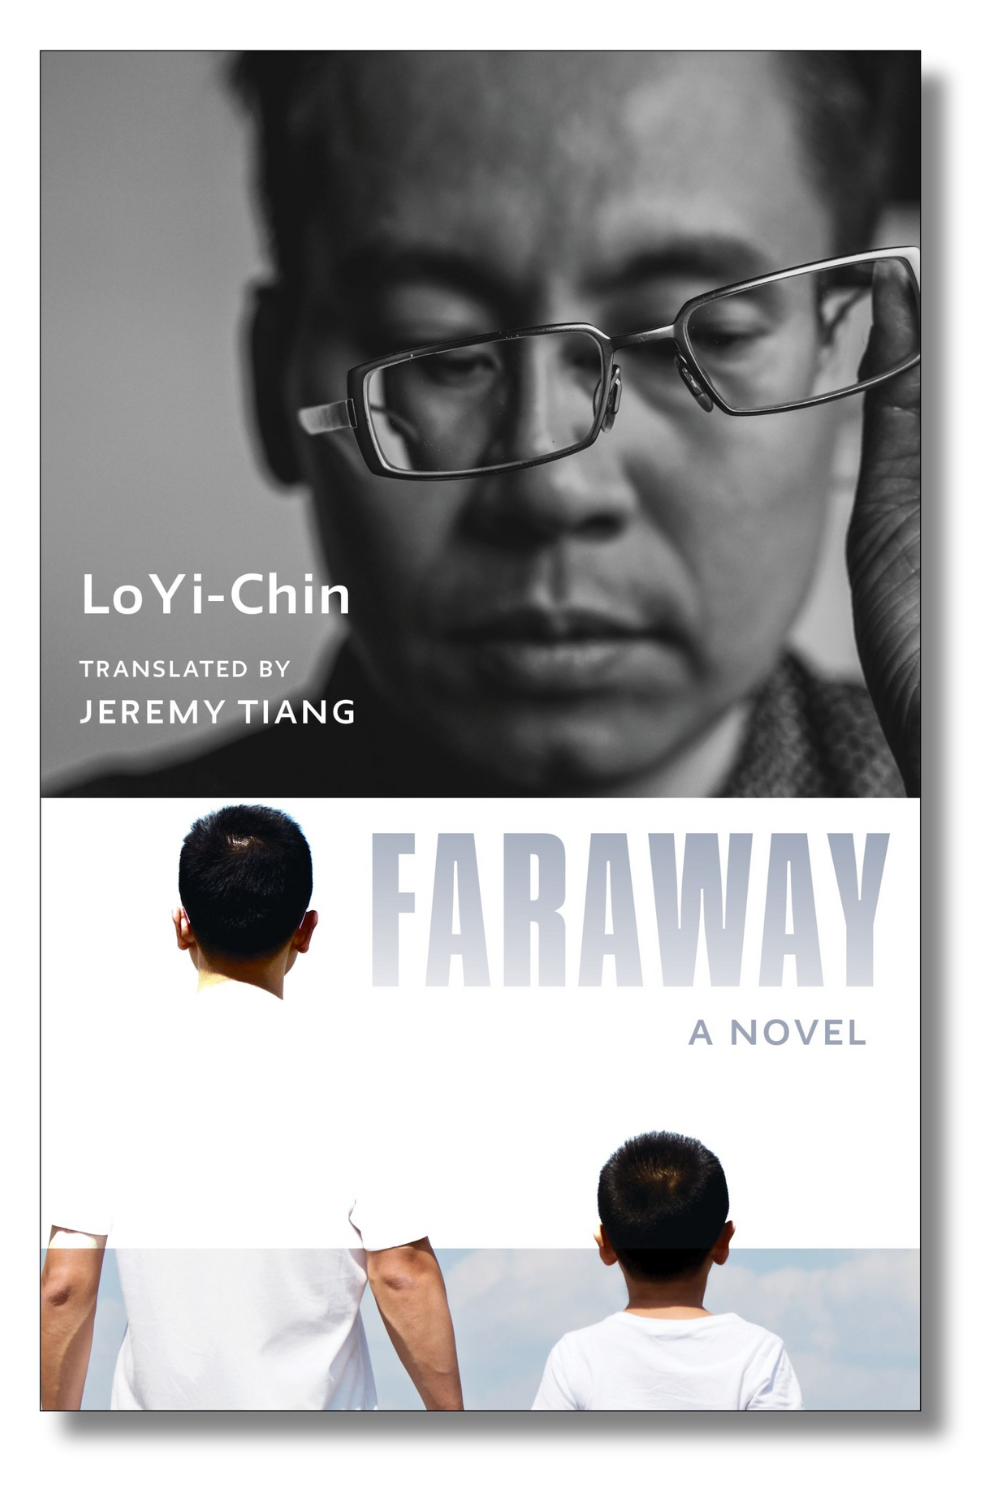 The cover of "Faraway" by Lo Yi-Chin, translated by Jeremy Tiang